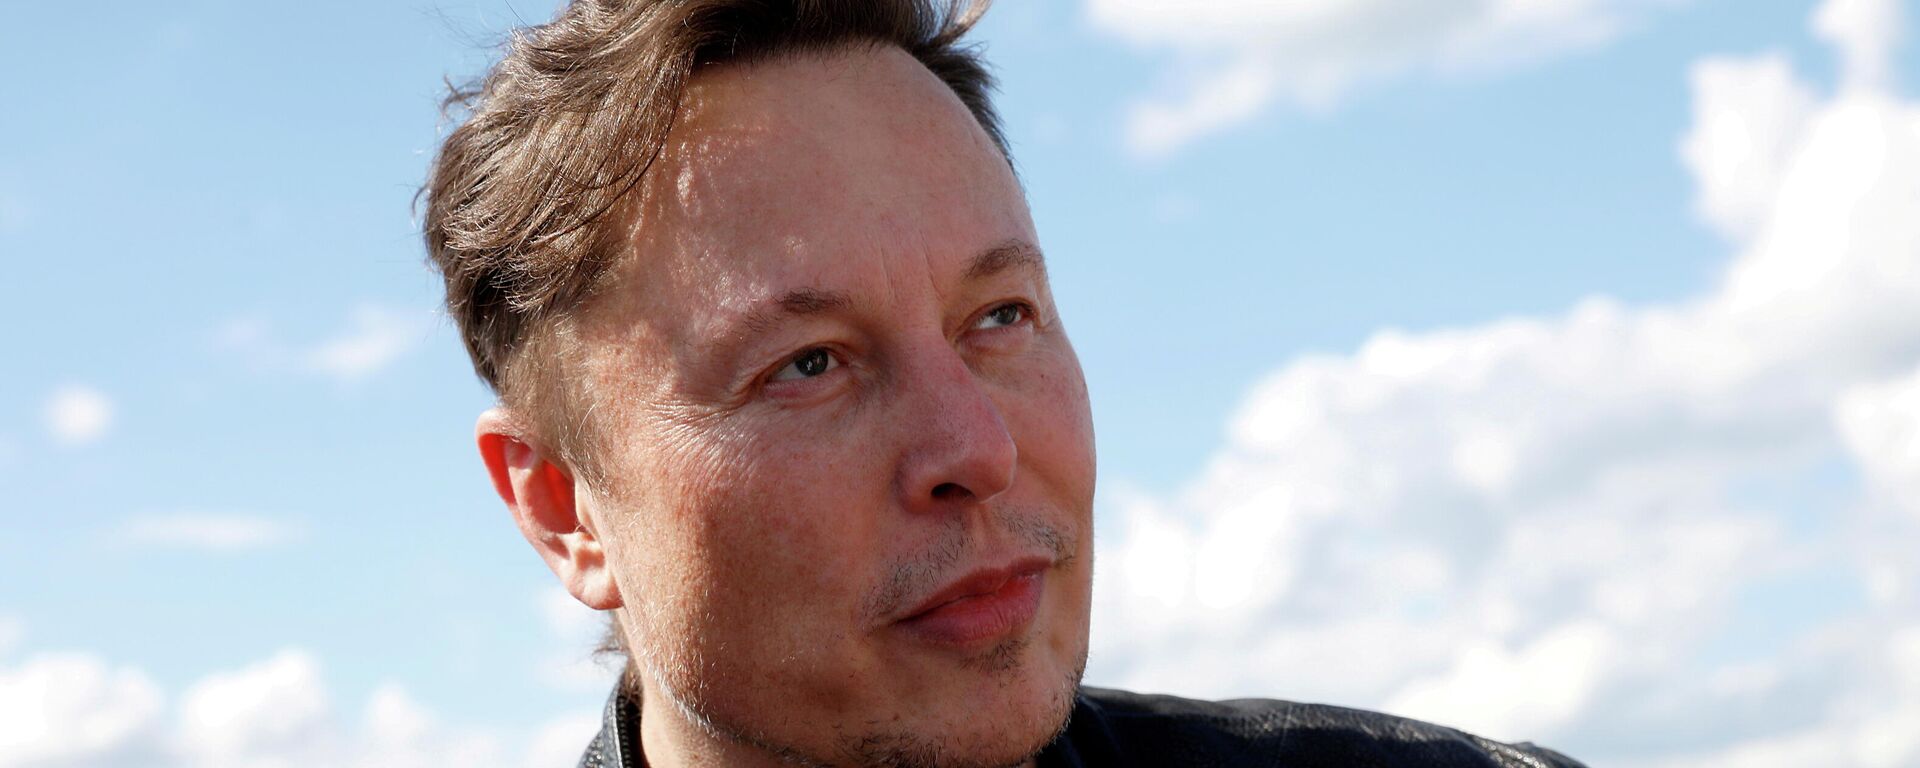 SpaceX founder and Tesla CEO Elon Musk looks on as he visits the construction site of Tesla's gigafactory in Gruenheide, near Berlin, Germany, May 17, 2021. - Sputnik International, 1920, 16.12.2021